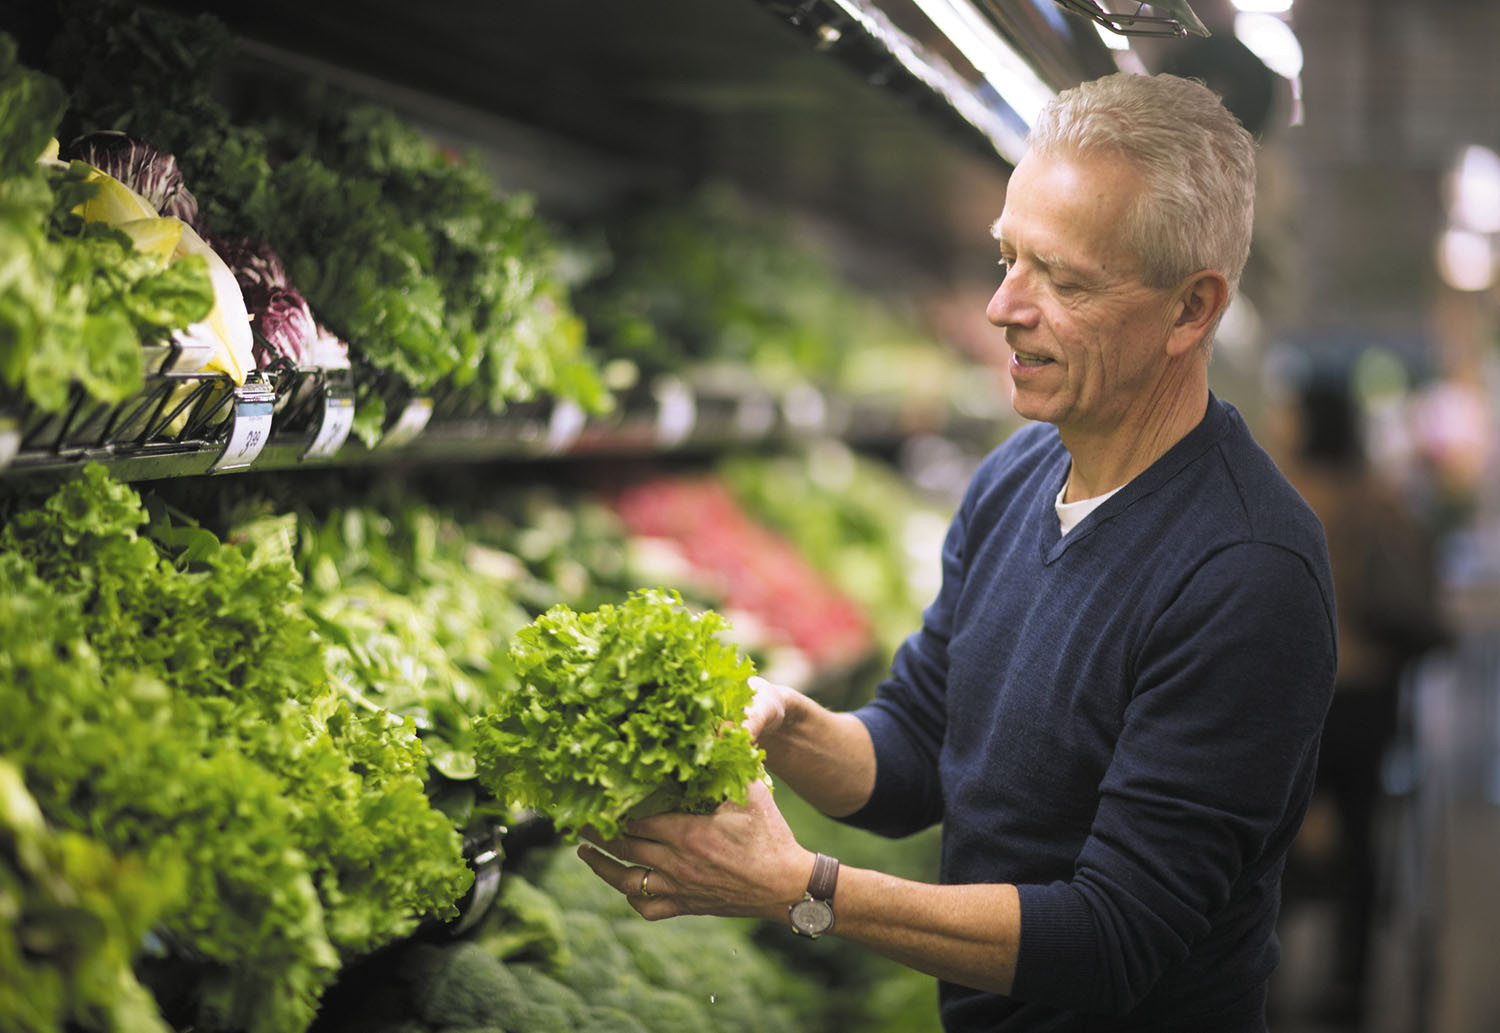 photo of a man choosing leafy greens from a supermarket produce section